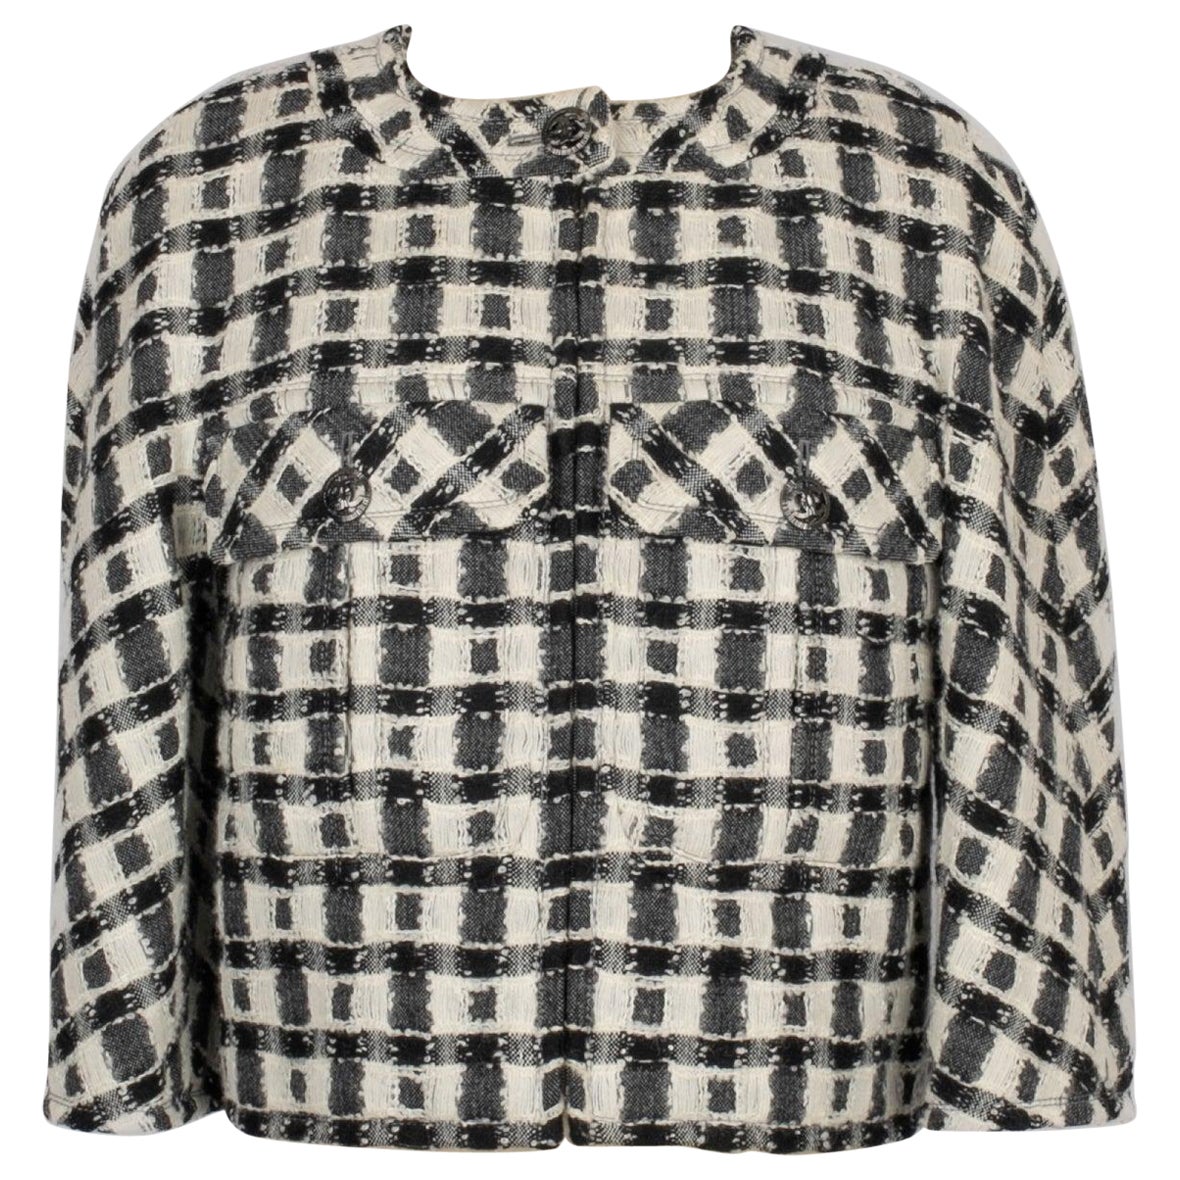 Chanel Short Jacket in Black and White Tweed, Silk Lining